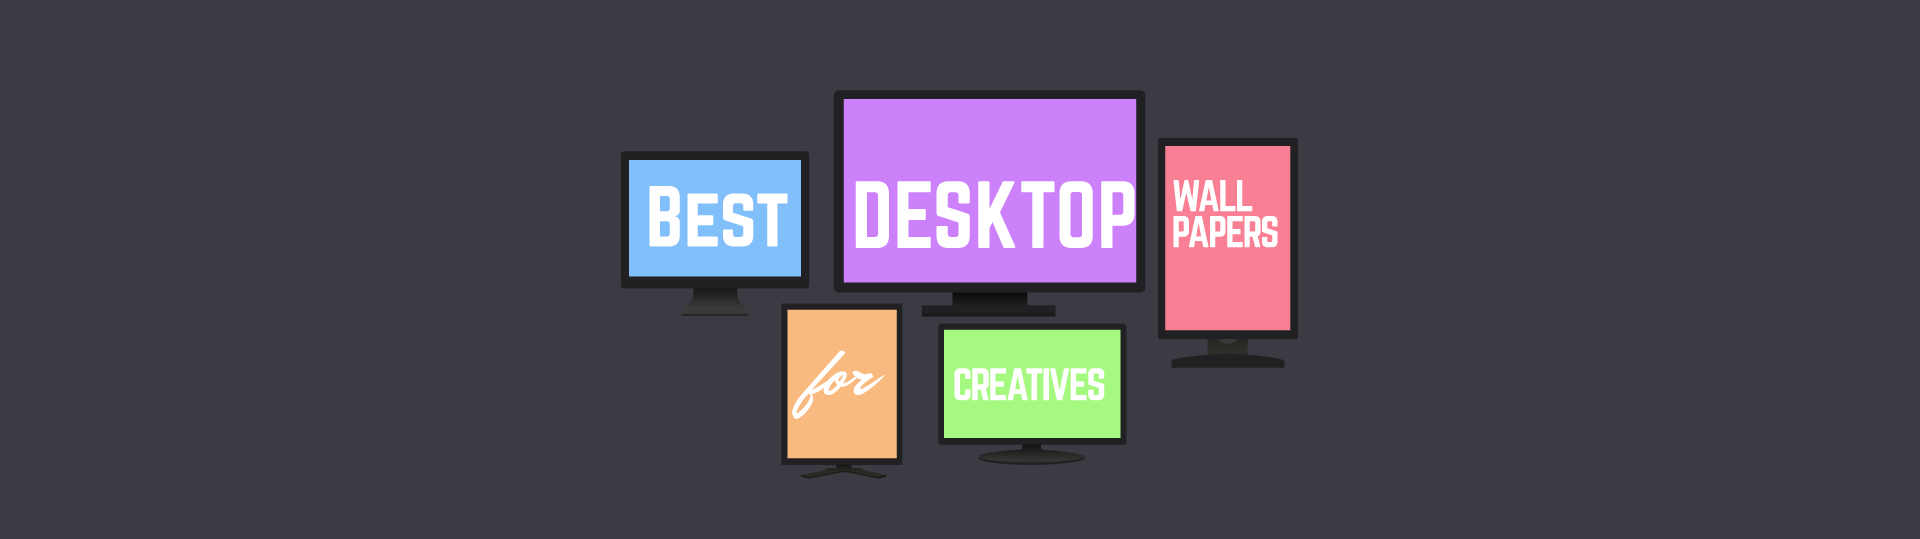 beautiful free wallpaper for creatives [2015 edition]